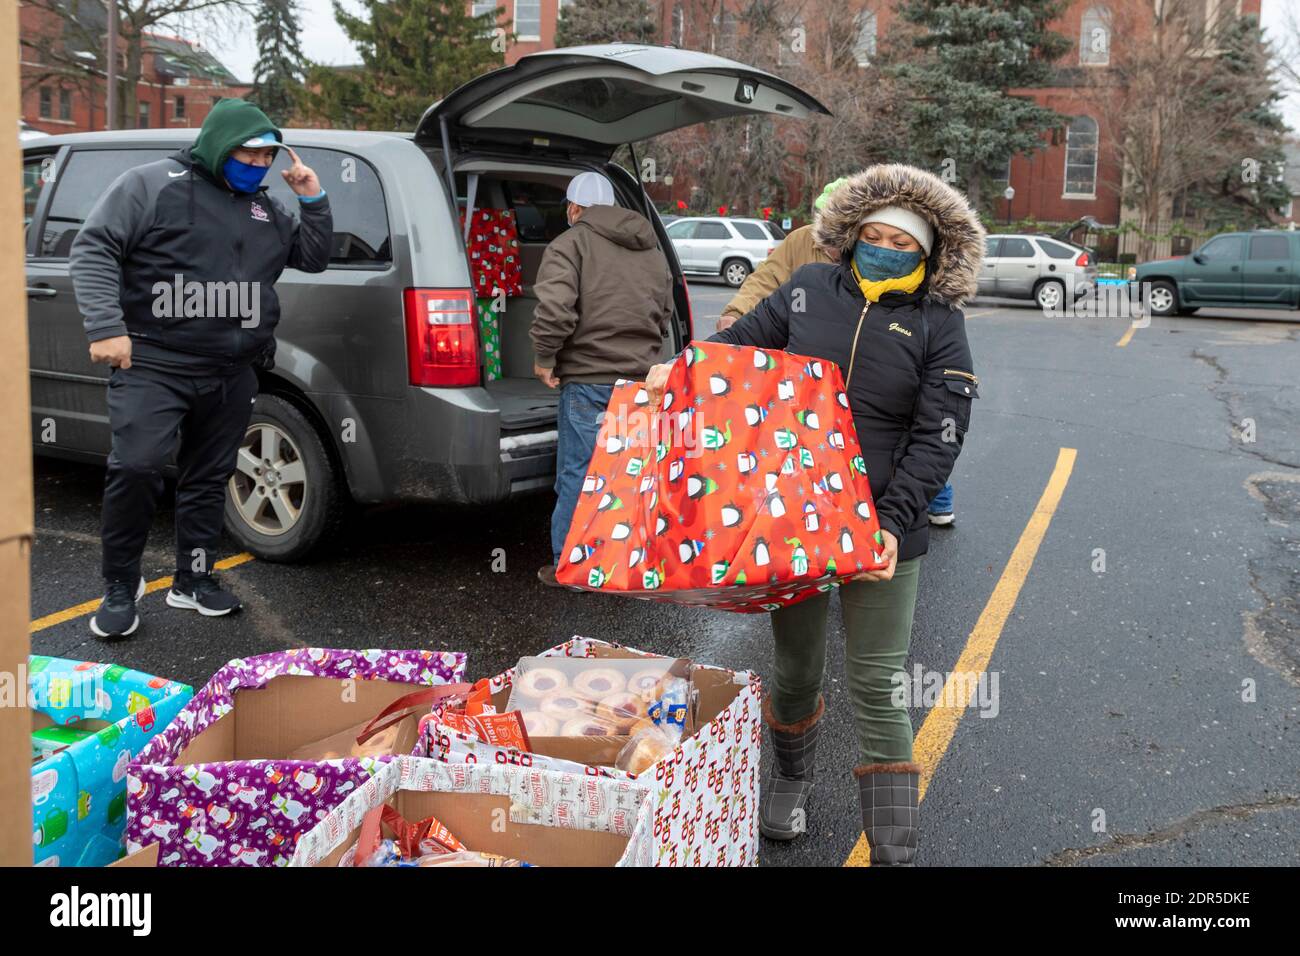 Detroit, Michigan, USA. 19th Dec, 2020. At St. Hedwig Catholic Church, the Michigan Muslim Community Council, in partnership with St. Hedwig's, delivered food boxes and Christmas packages to families in need. Volunteers placed boxes in cars as they drove through the church parking lot. The food boxes came from the U.S. Department of Agriculture. Credit: Jim West/Alamy Live News Stock Photo